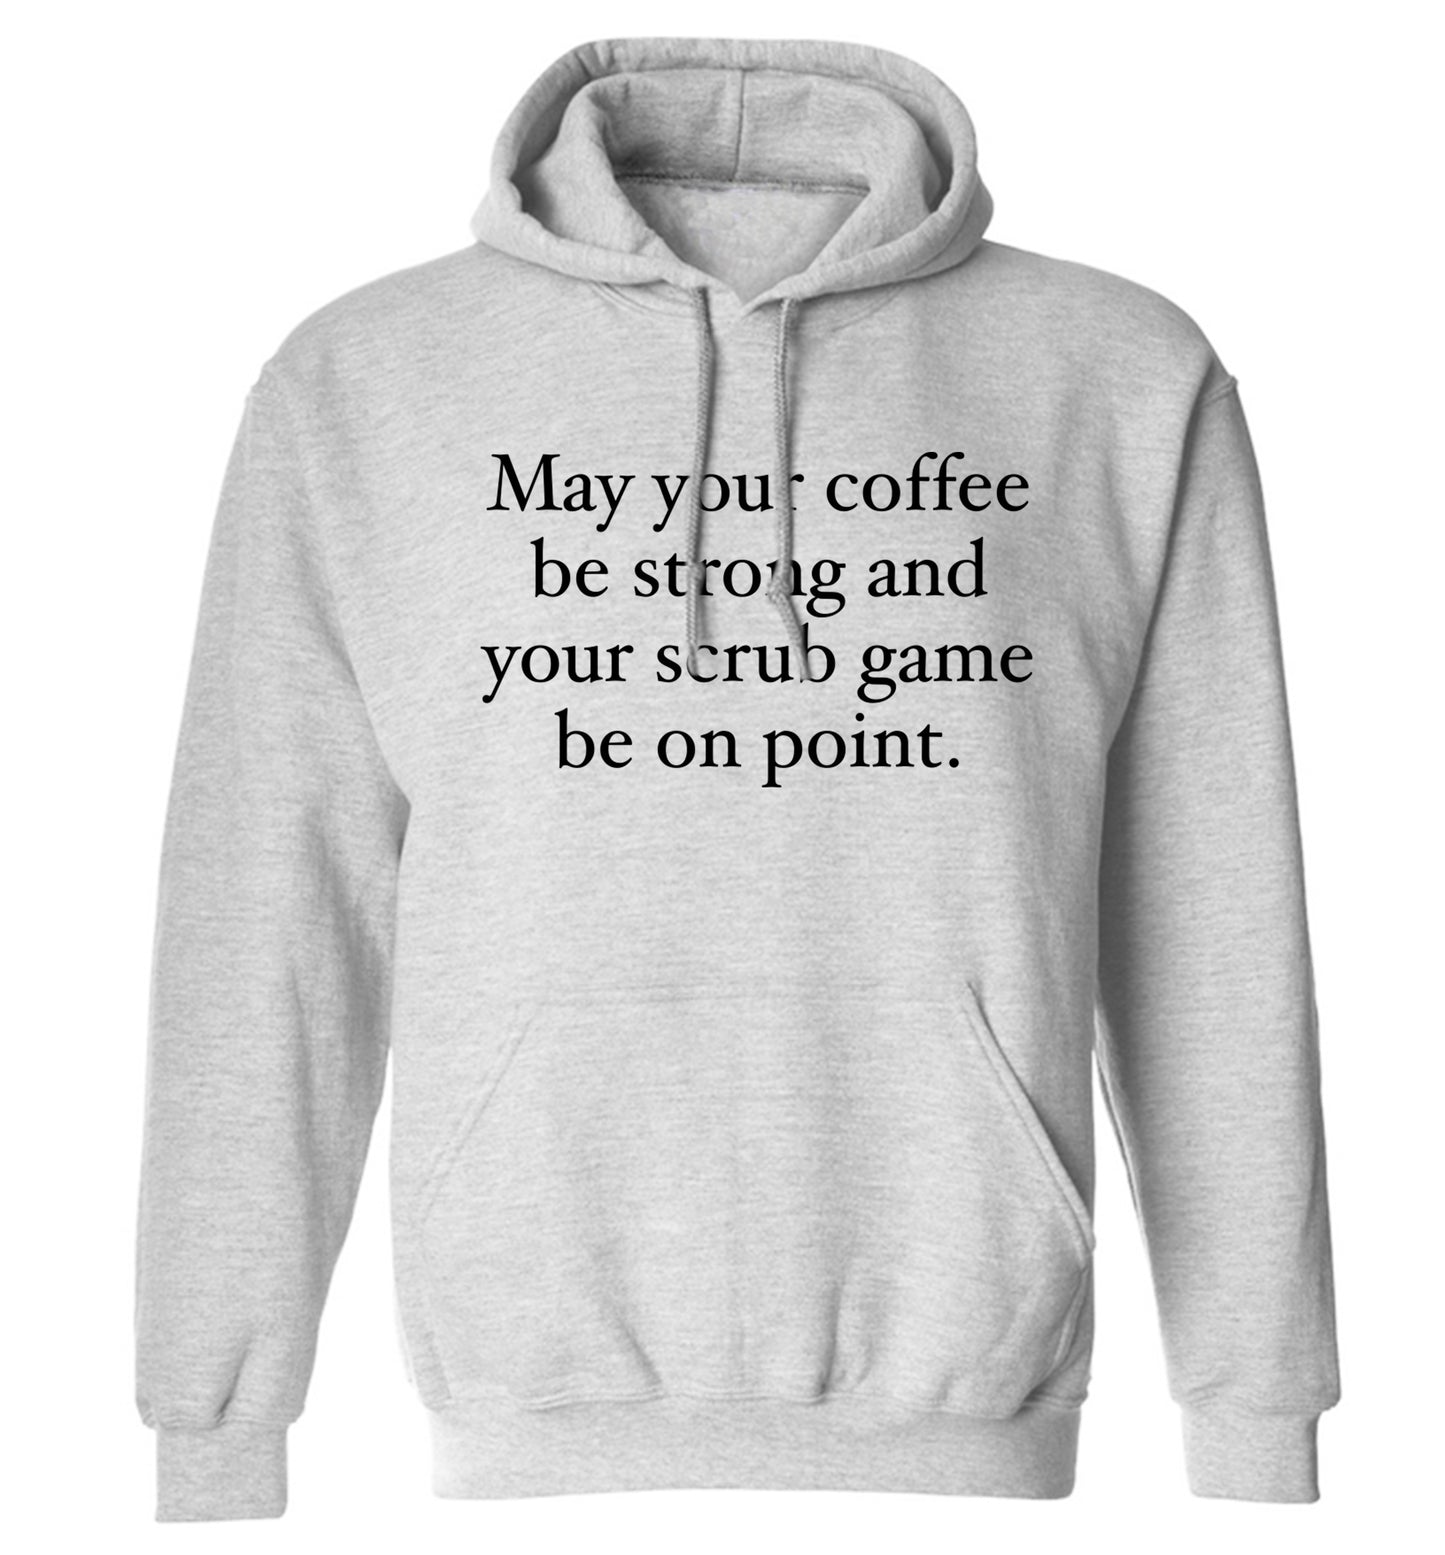 May your caffeine be strong and your scrub game be on point adults unisex grey hoodie 2XL